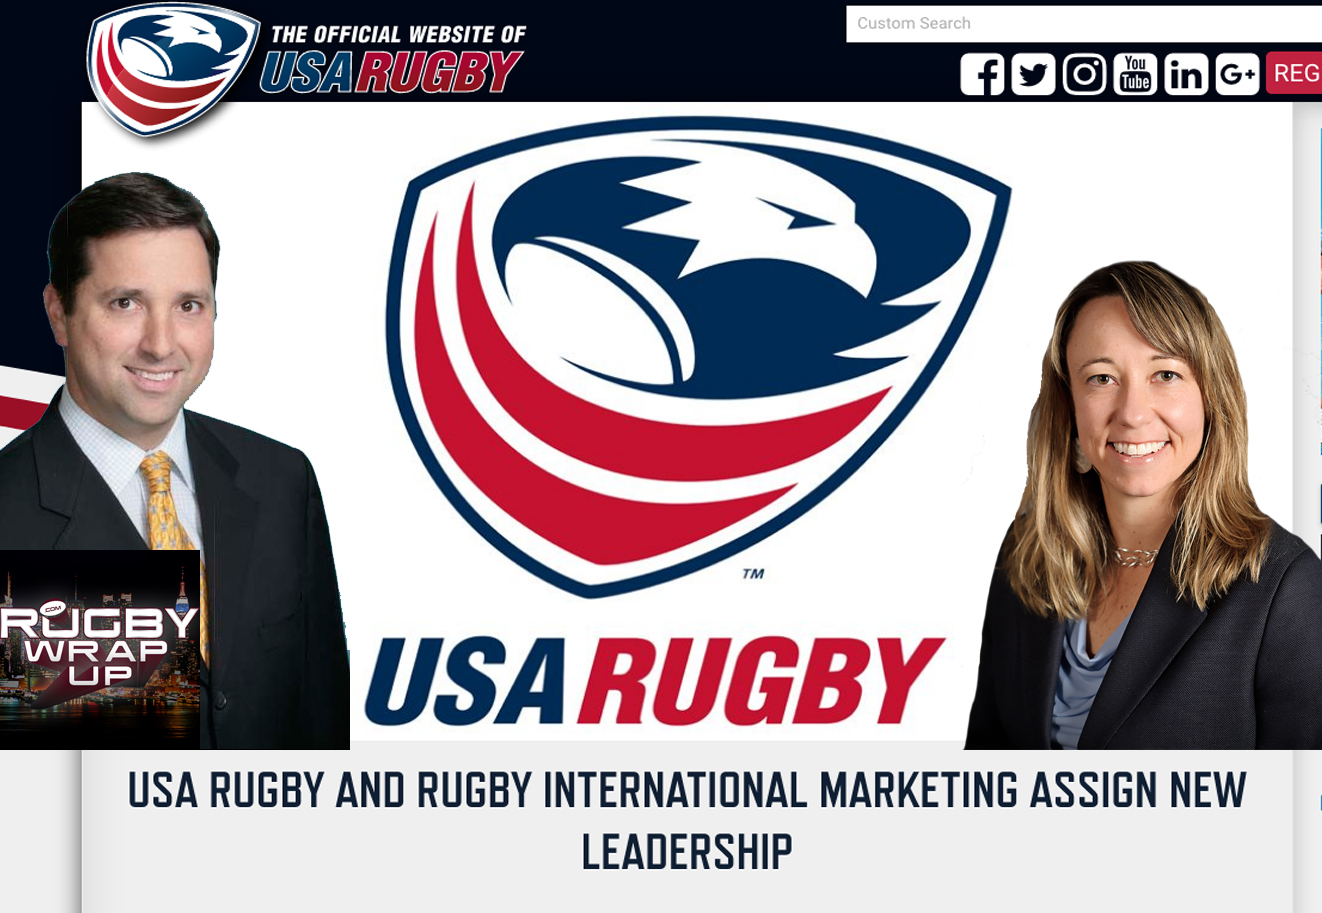 David_Sternberg, Pam_Kosanke, Rugby_Wrap_Up, USA Rugby and Rugby International Marketing assign new leadership